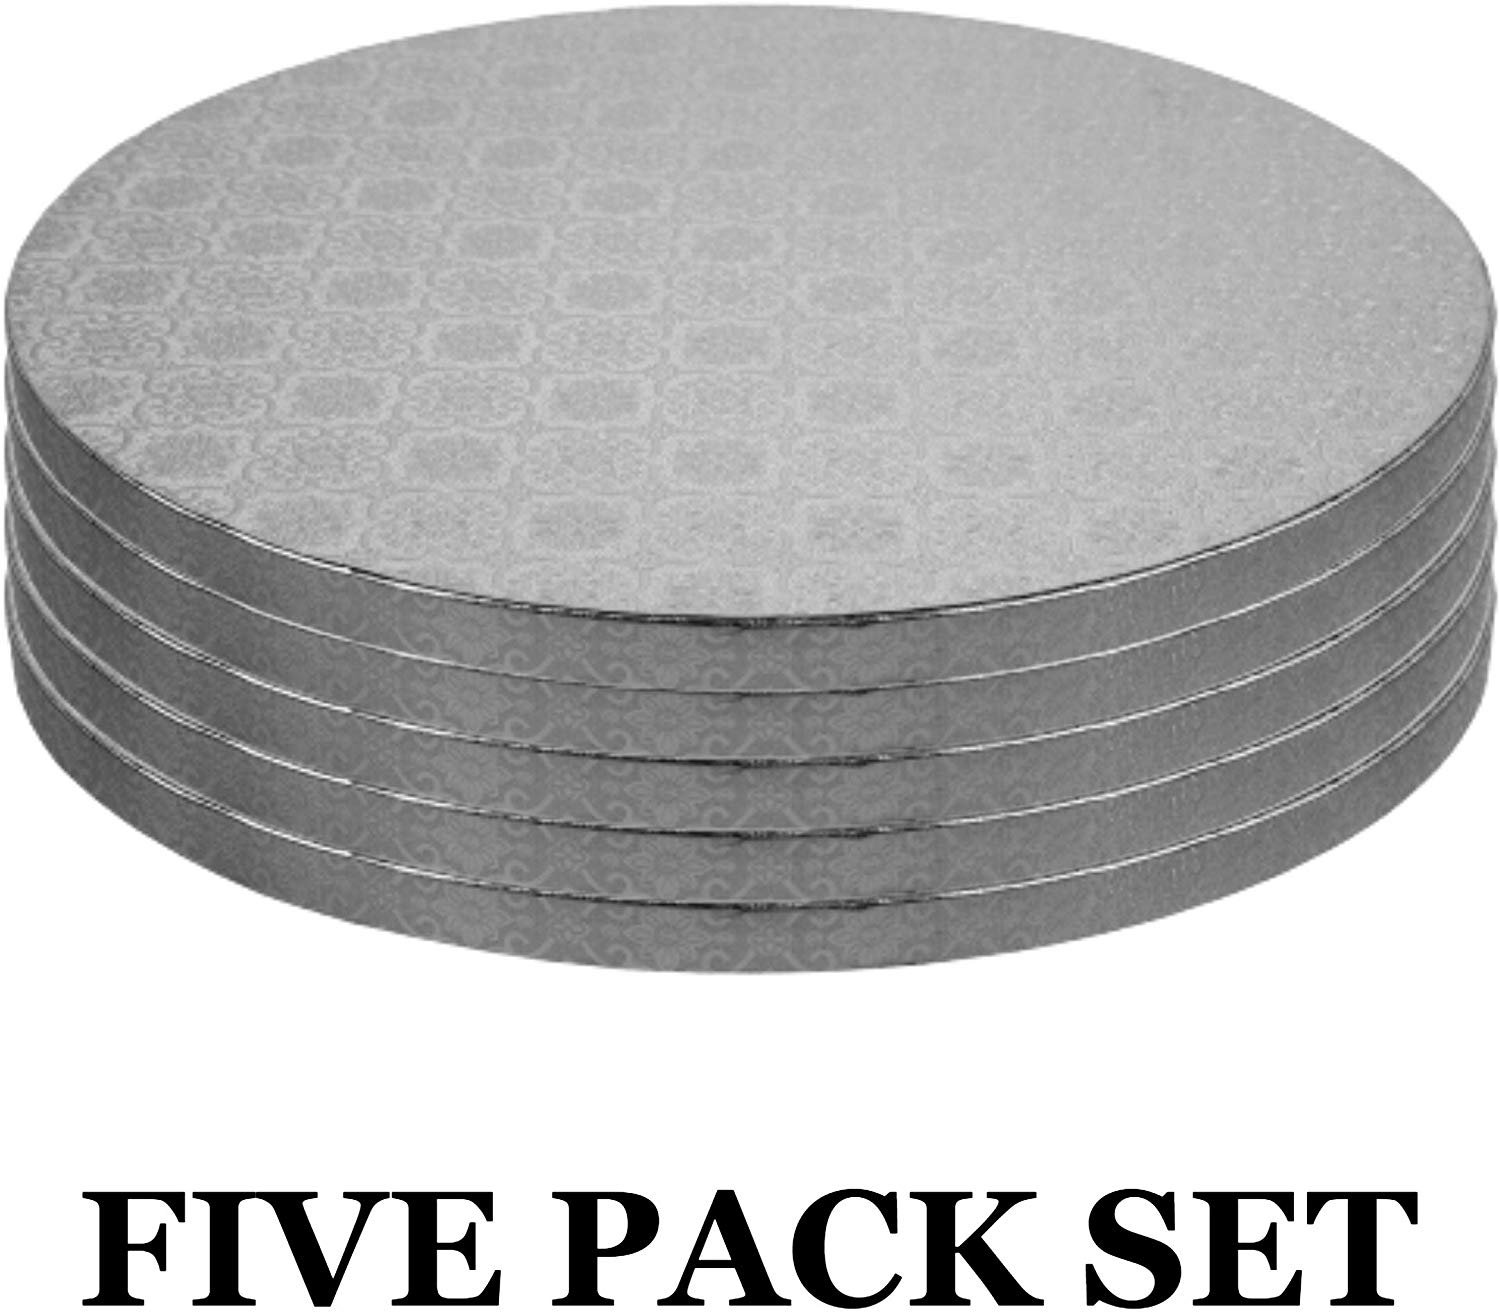 OCreme Cake Board, Silver Foil Round Cake Circles with Gorgeous Design, Sturdy & Durable 1/2 Thick Cake Drums, Round Cake Boards with 12 Diameter, Pack of 5 Disposable Cake Drums - image 2 of 6